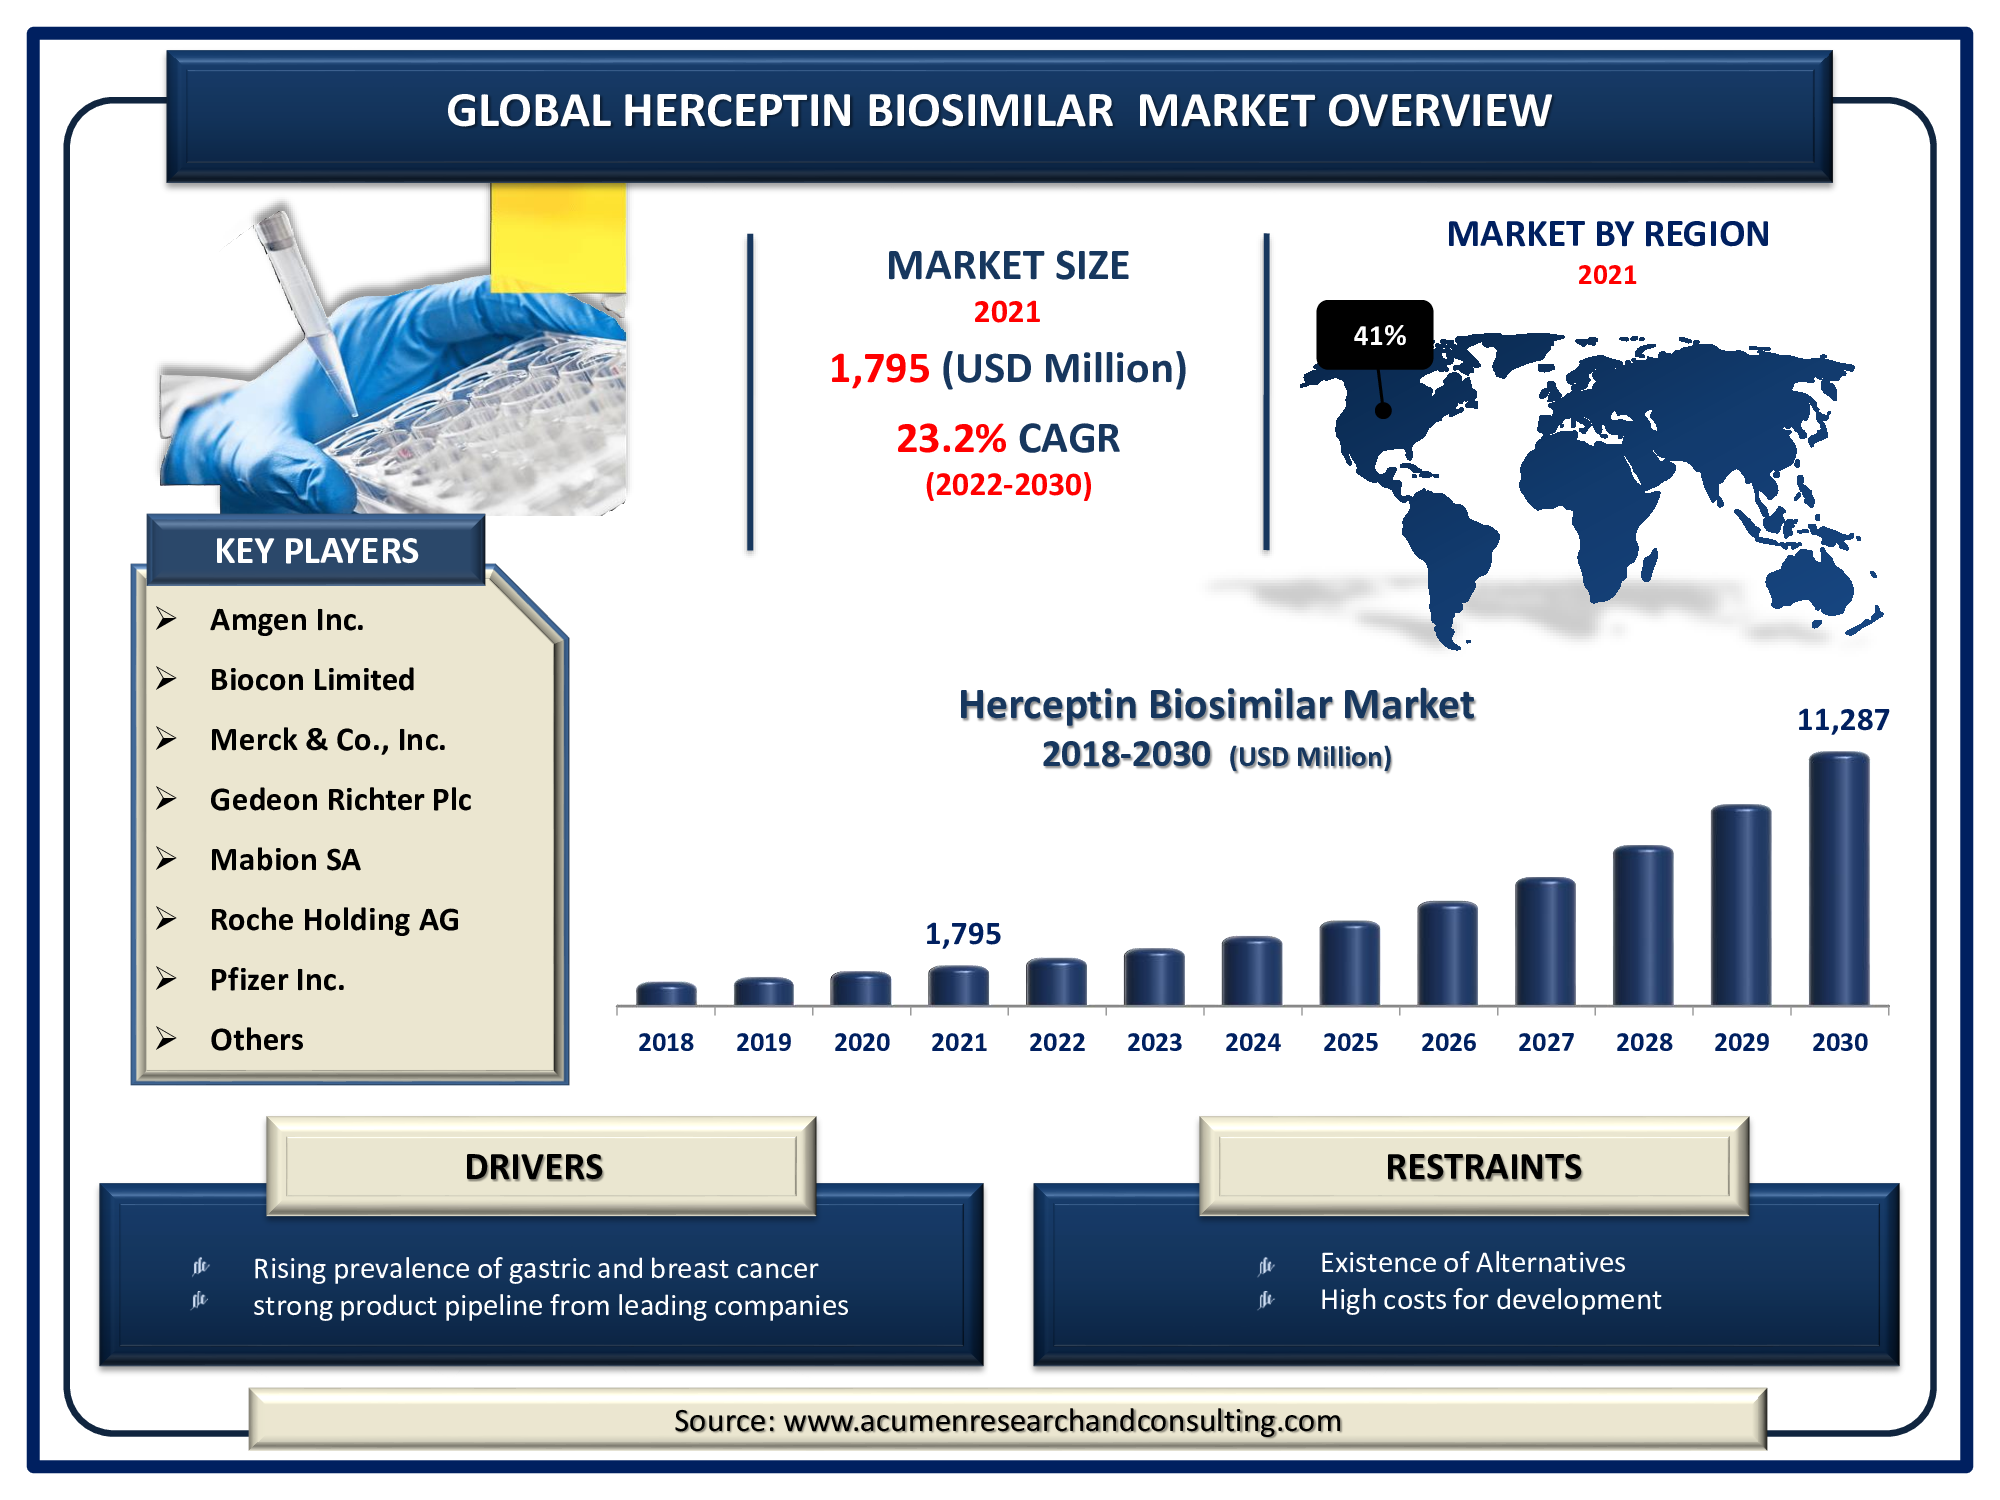 The Global Herceptin Biosimilar Market Size was valued at USD 1,795 Million in 2021 and is predicted to be worth USD 11,287 Million by 2030, with a CAGR of 23.2% from 2022 to 2030.